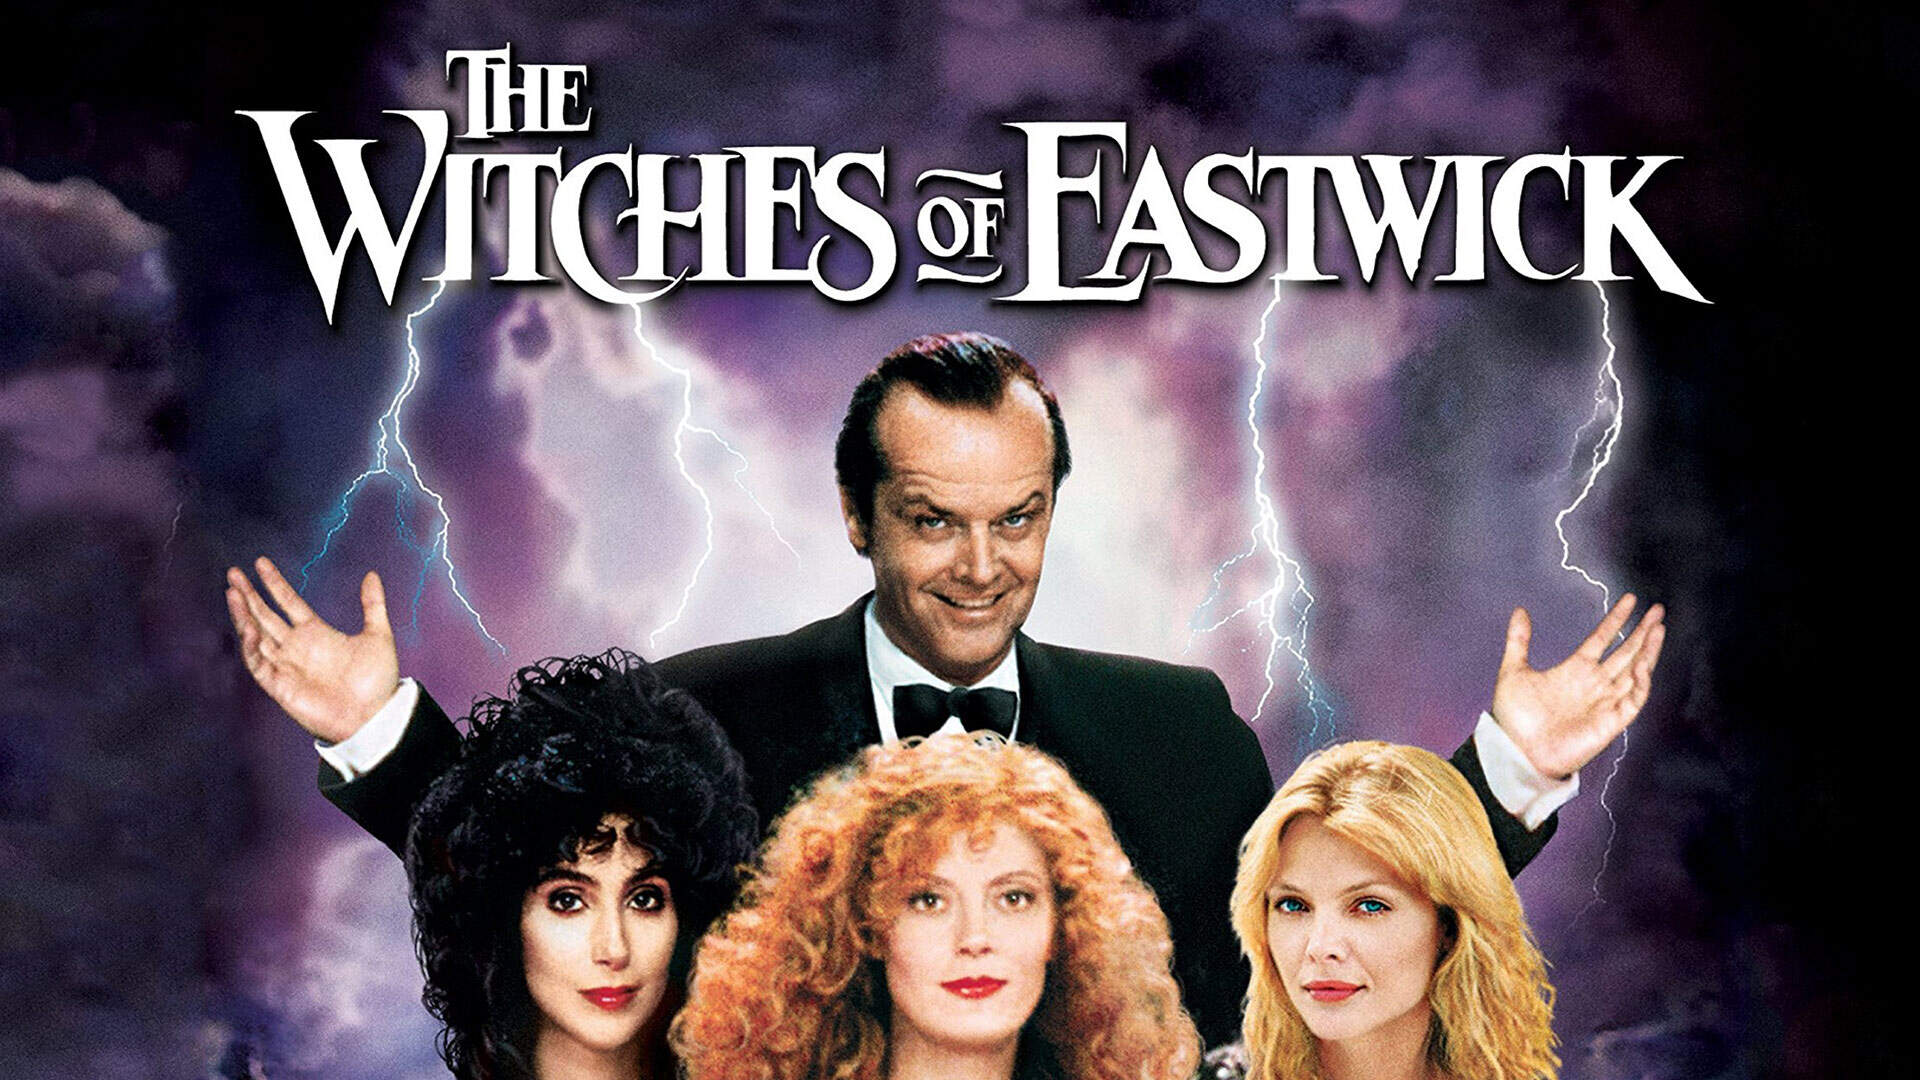 42-facts-about-the-movie-the-witches-of-eastwick